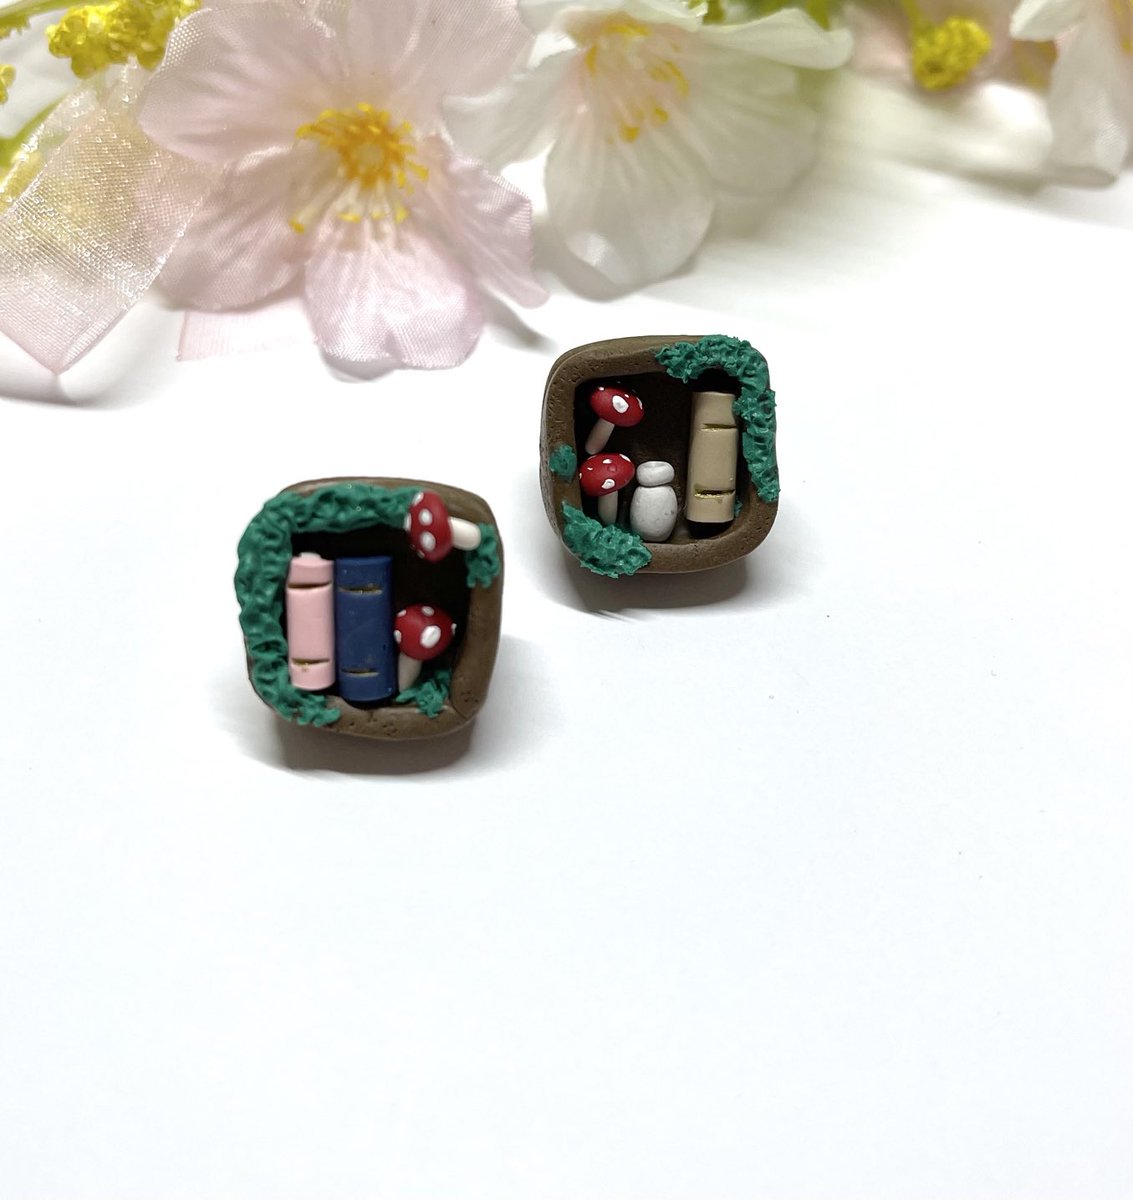 Tiny book nook studs with moss and mushies!